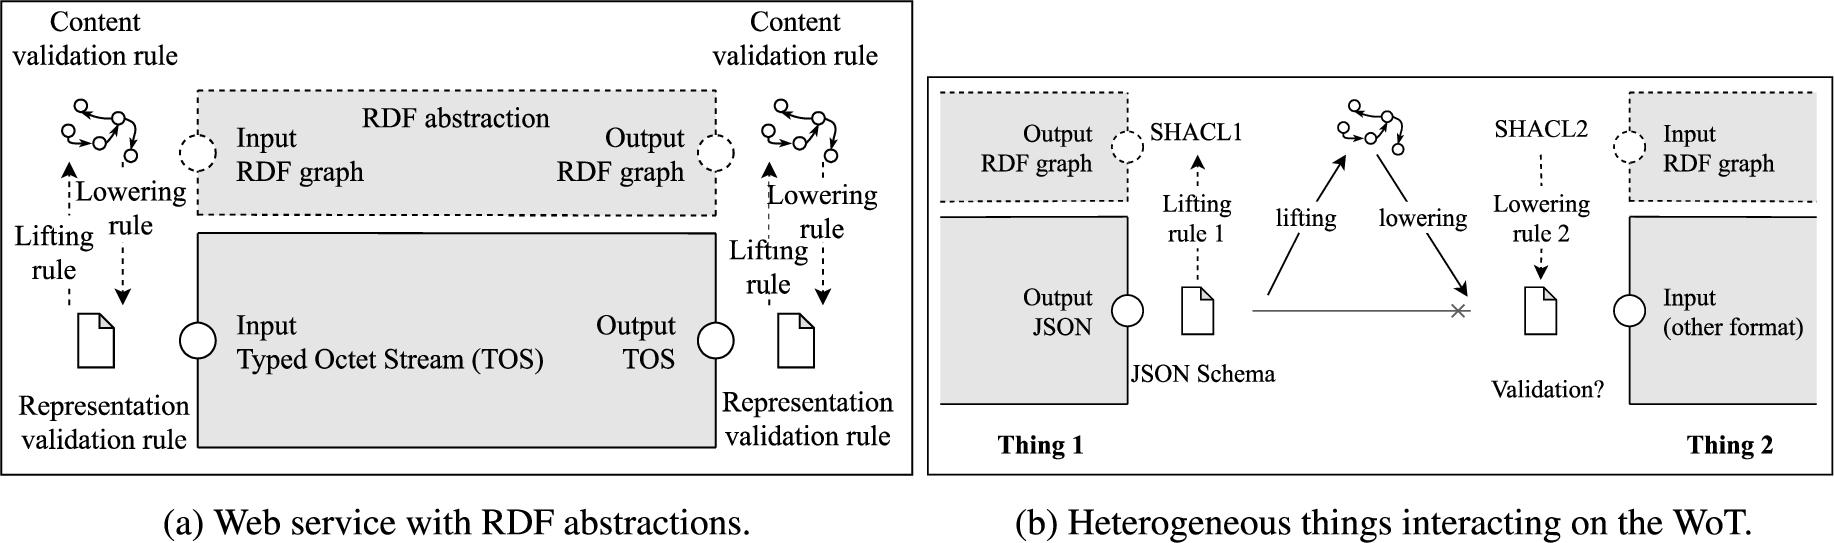 Semantics in the Edge: using RDF abstractions for the content of Web resource.